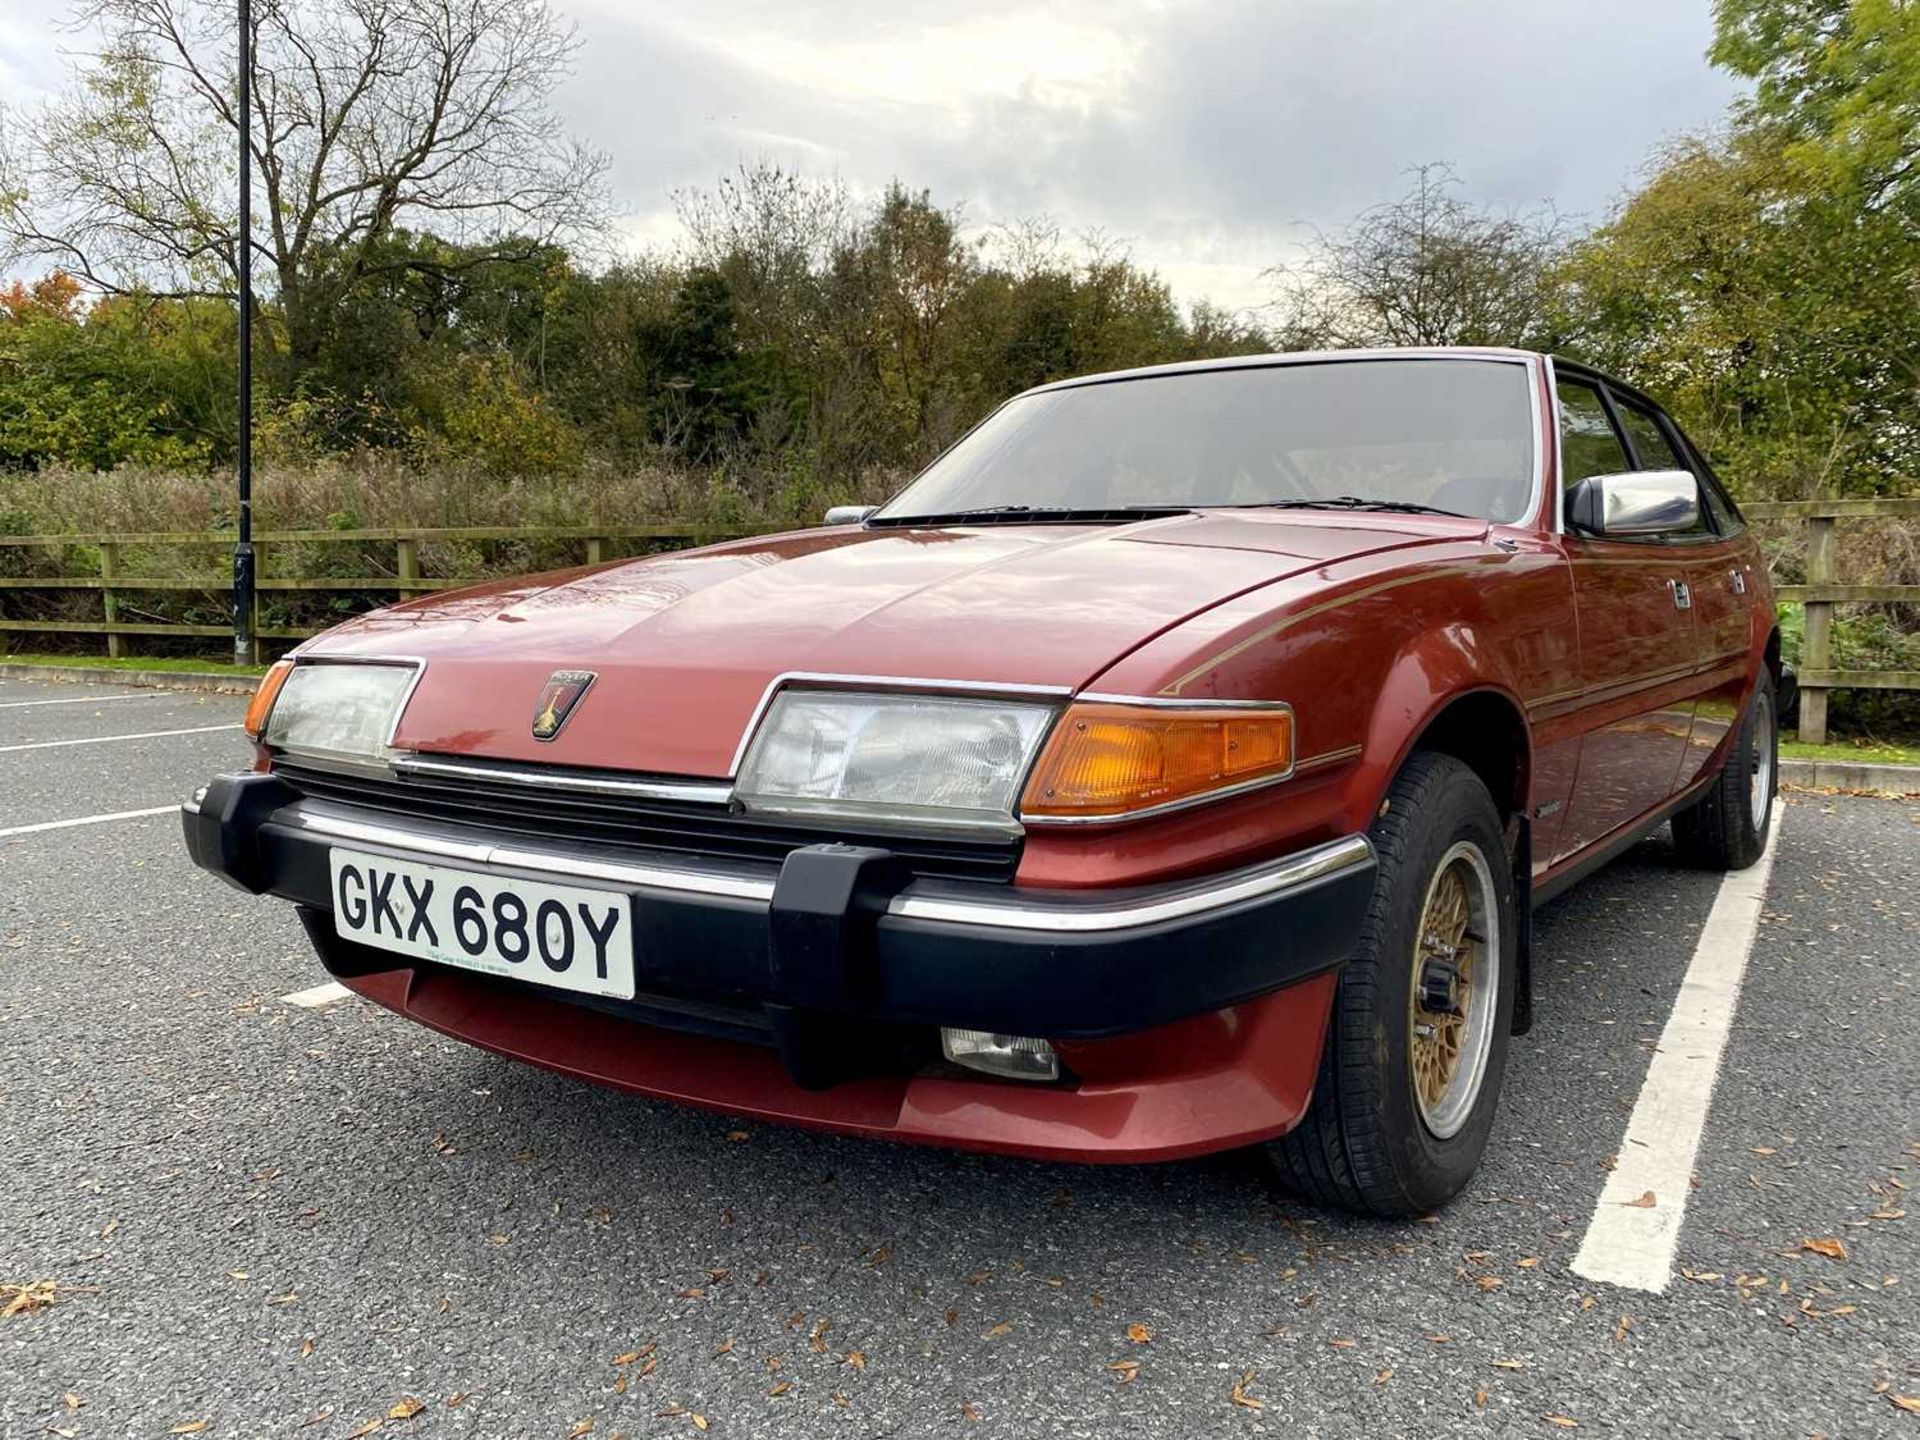 1982 Rover SD1 3500 SE Only 29,000 miles - Image 6 of 100